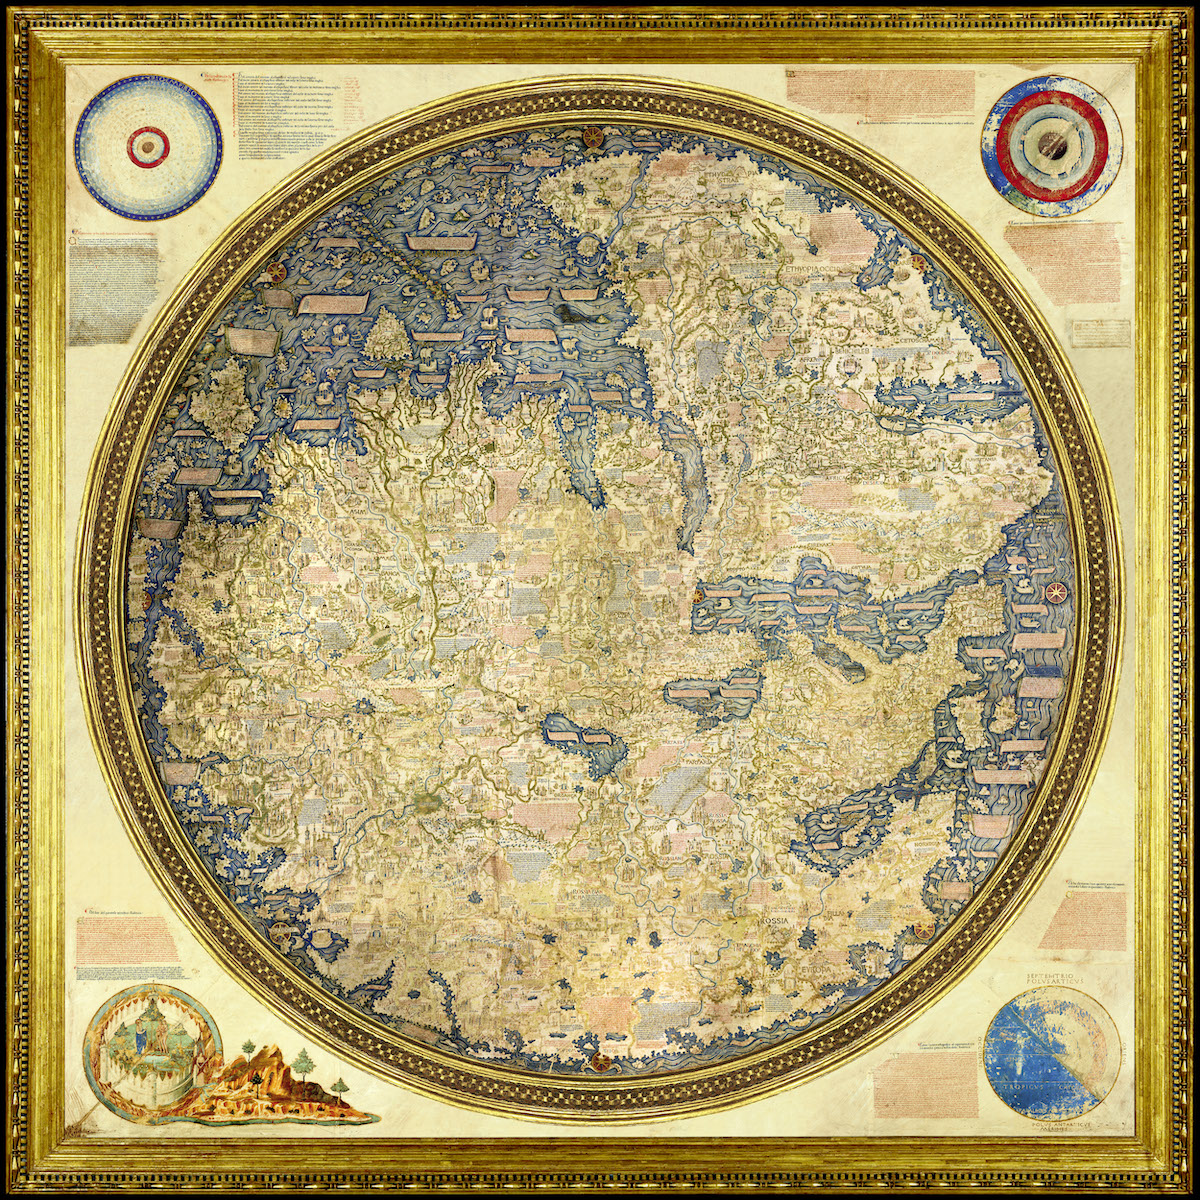 Historical map of the world depicted as a circular planisphere crafted in the 1450s in Venice, Italy by Fra Mauro.